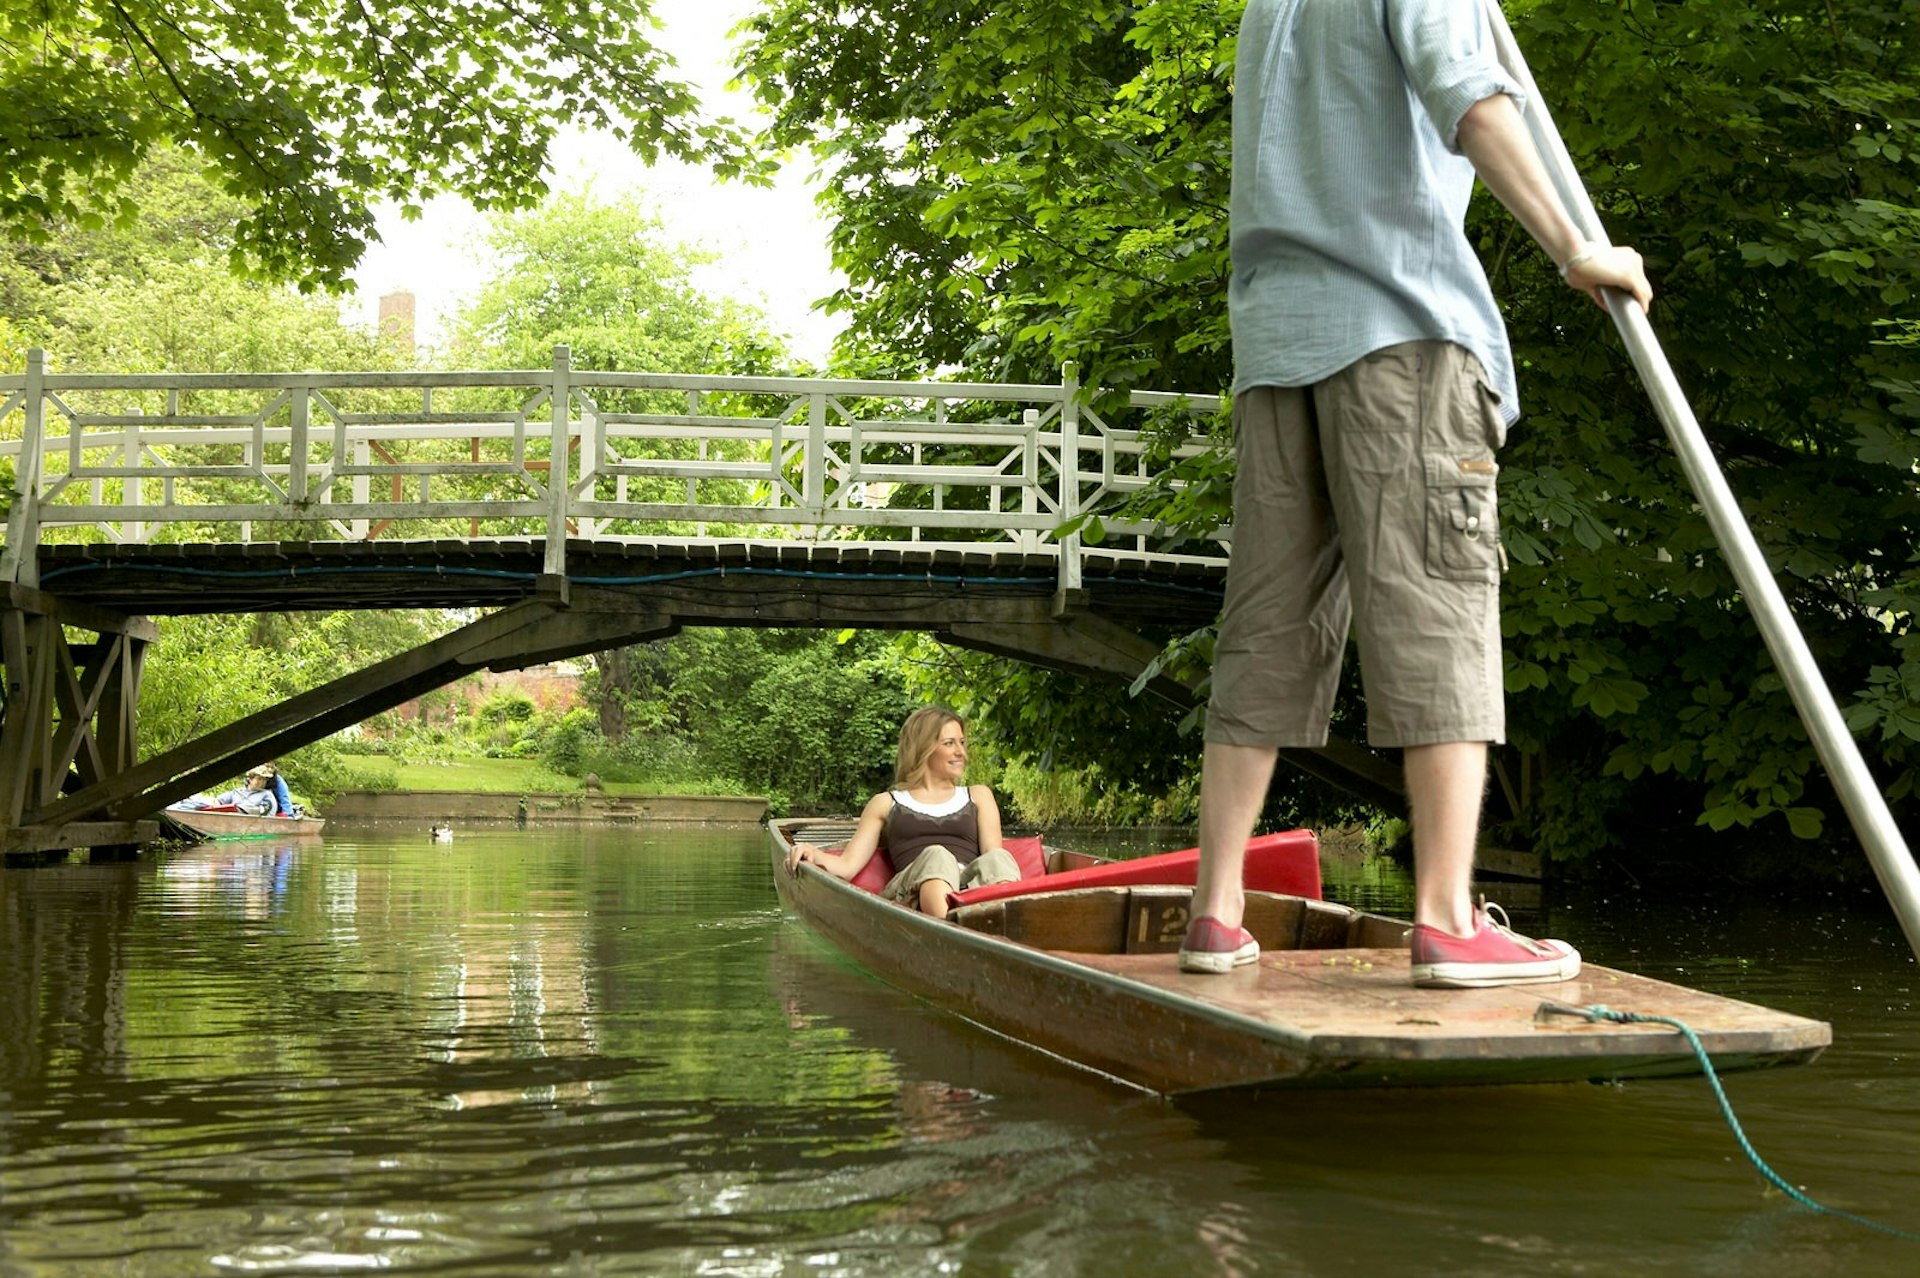 See where your imagination takes you as you punt along the river in Oxford © Visit Britain / Getty Images